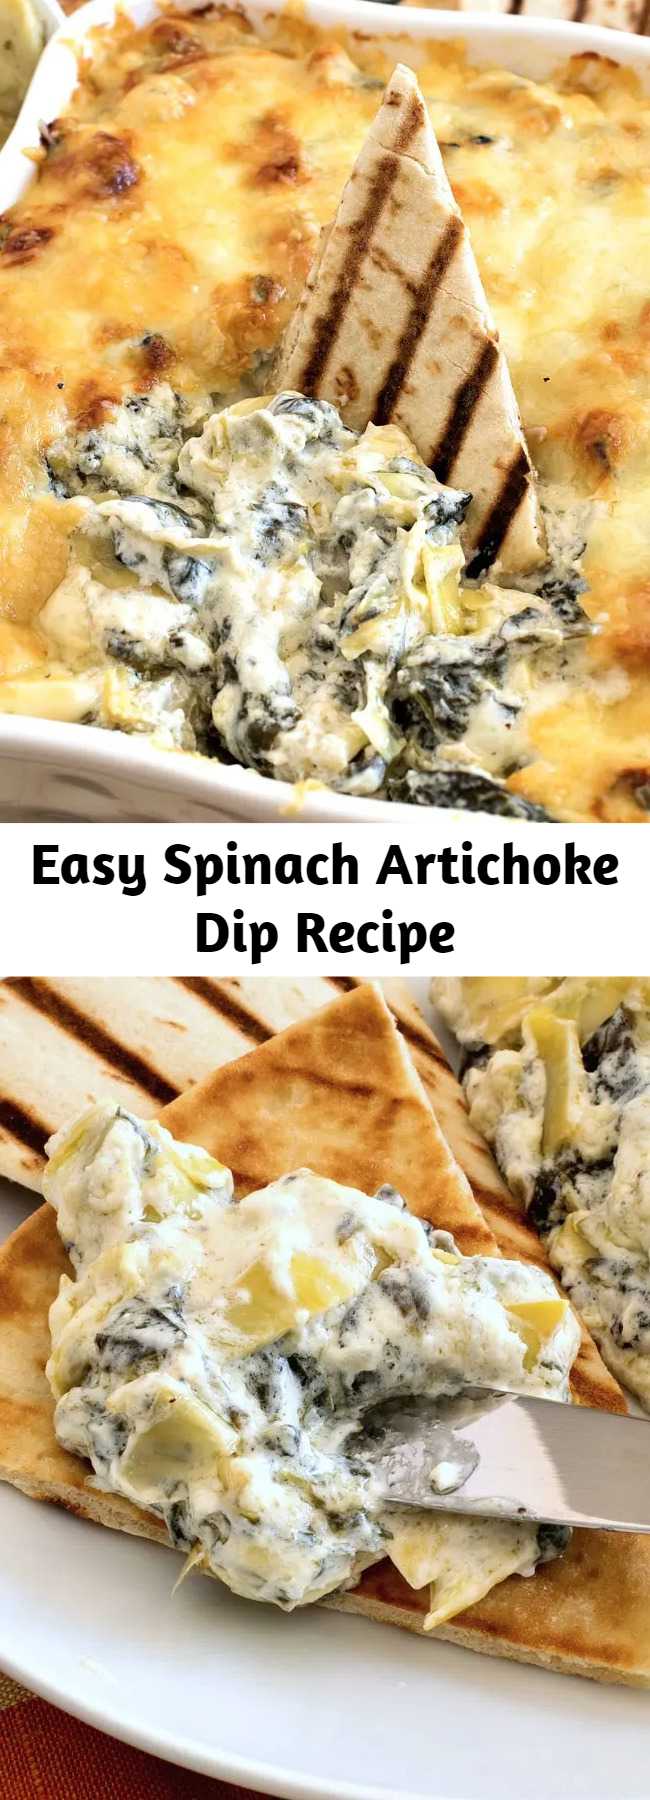 Easy Spinach Artichoke Dip Recipe - Spinach Artichoke Dip is a hot, creamy dip loaded with fresh baby spinach and marinated artichokes.